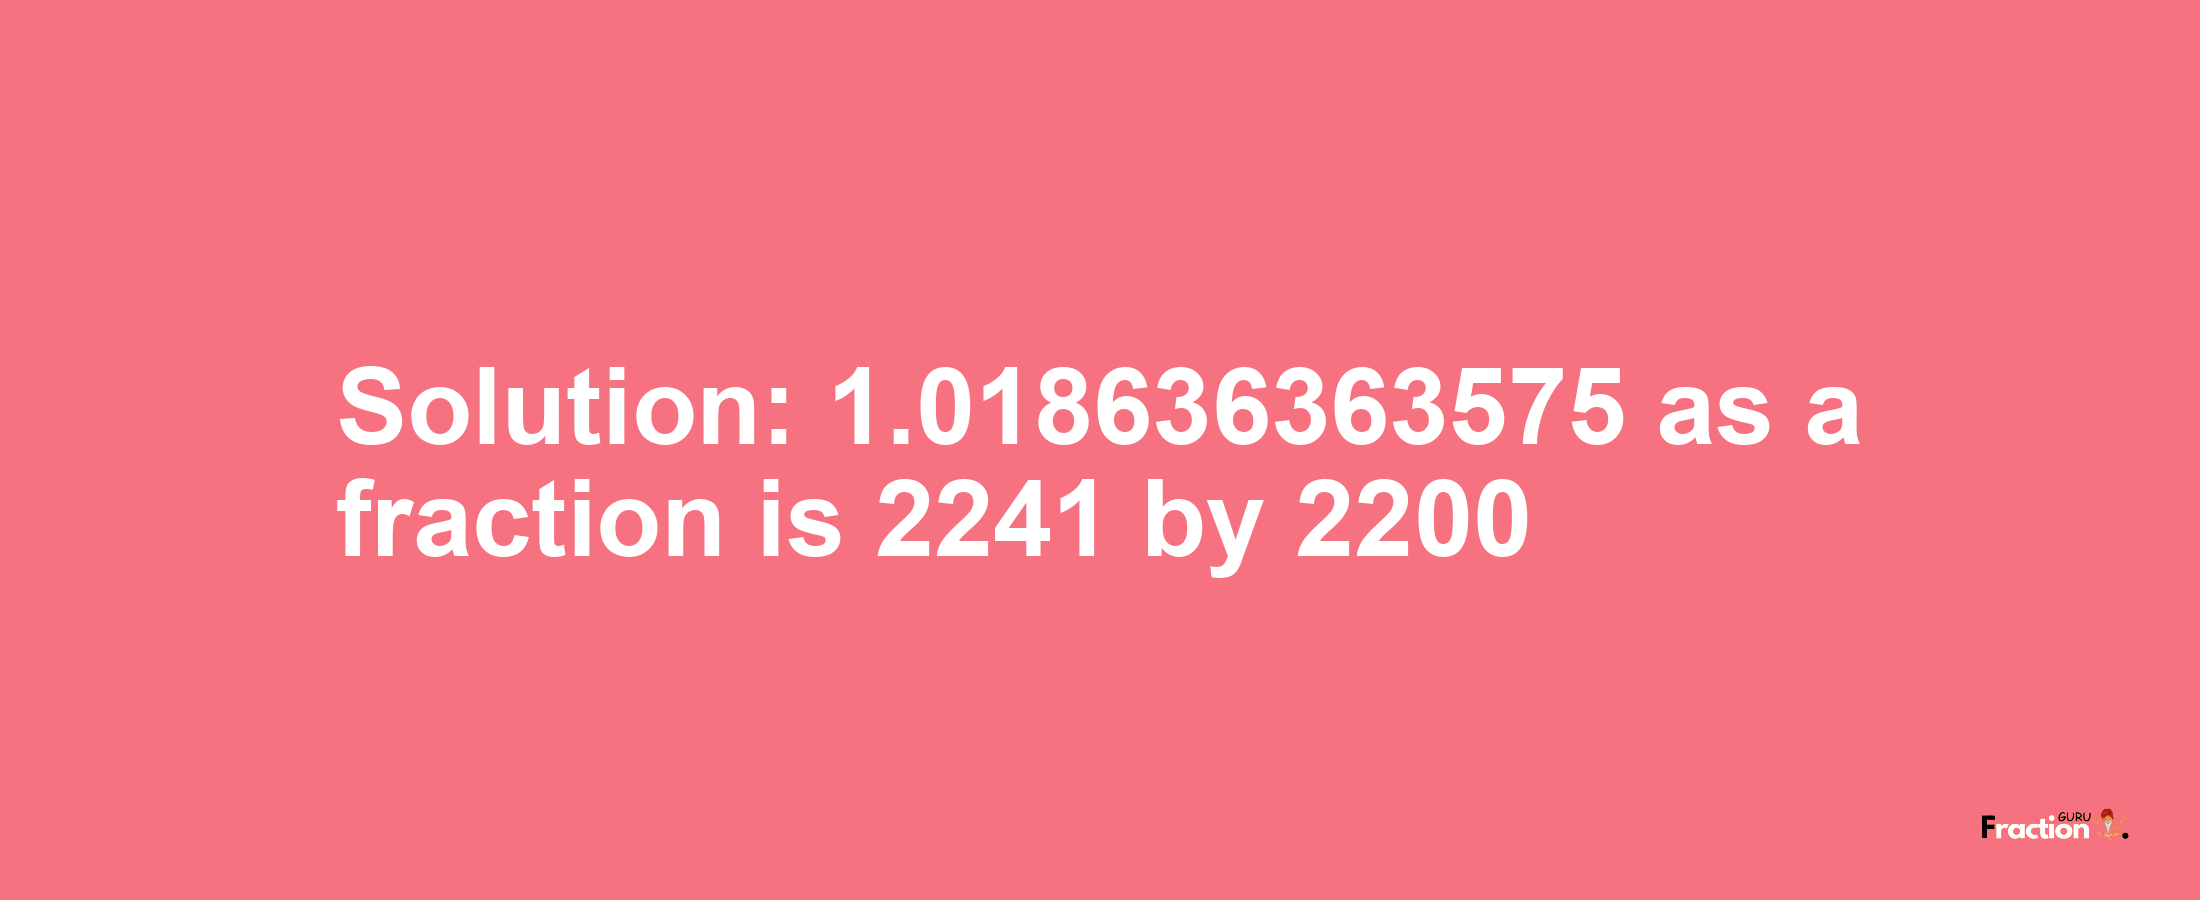 Solution:1.018636363575 as a fraction is 2241/2200